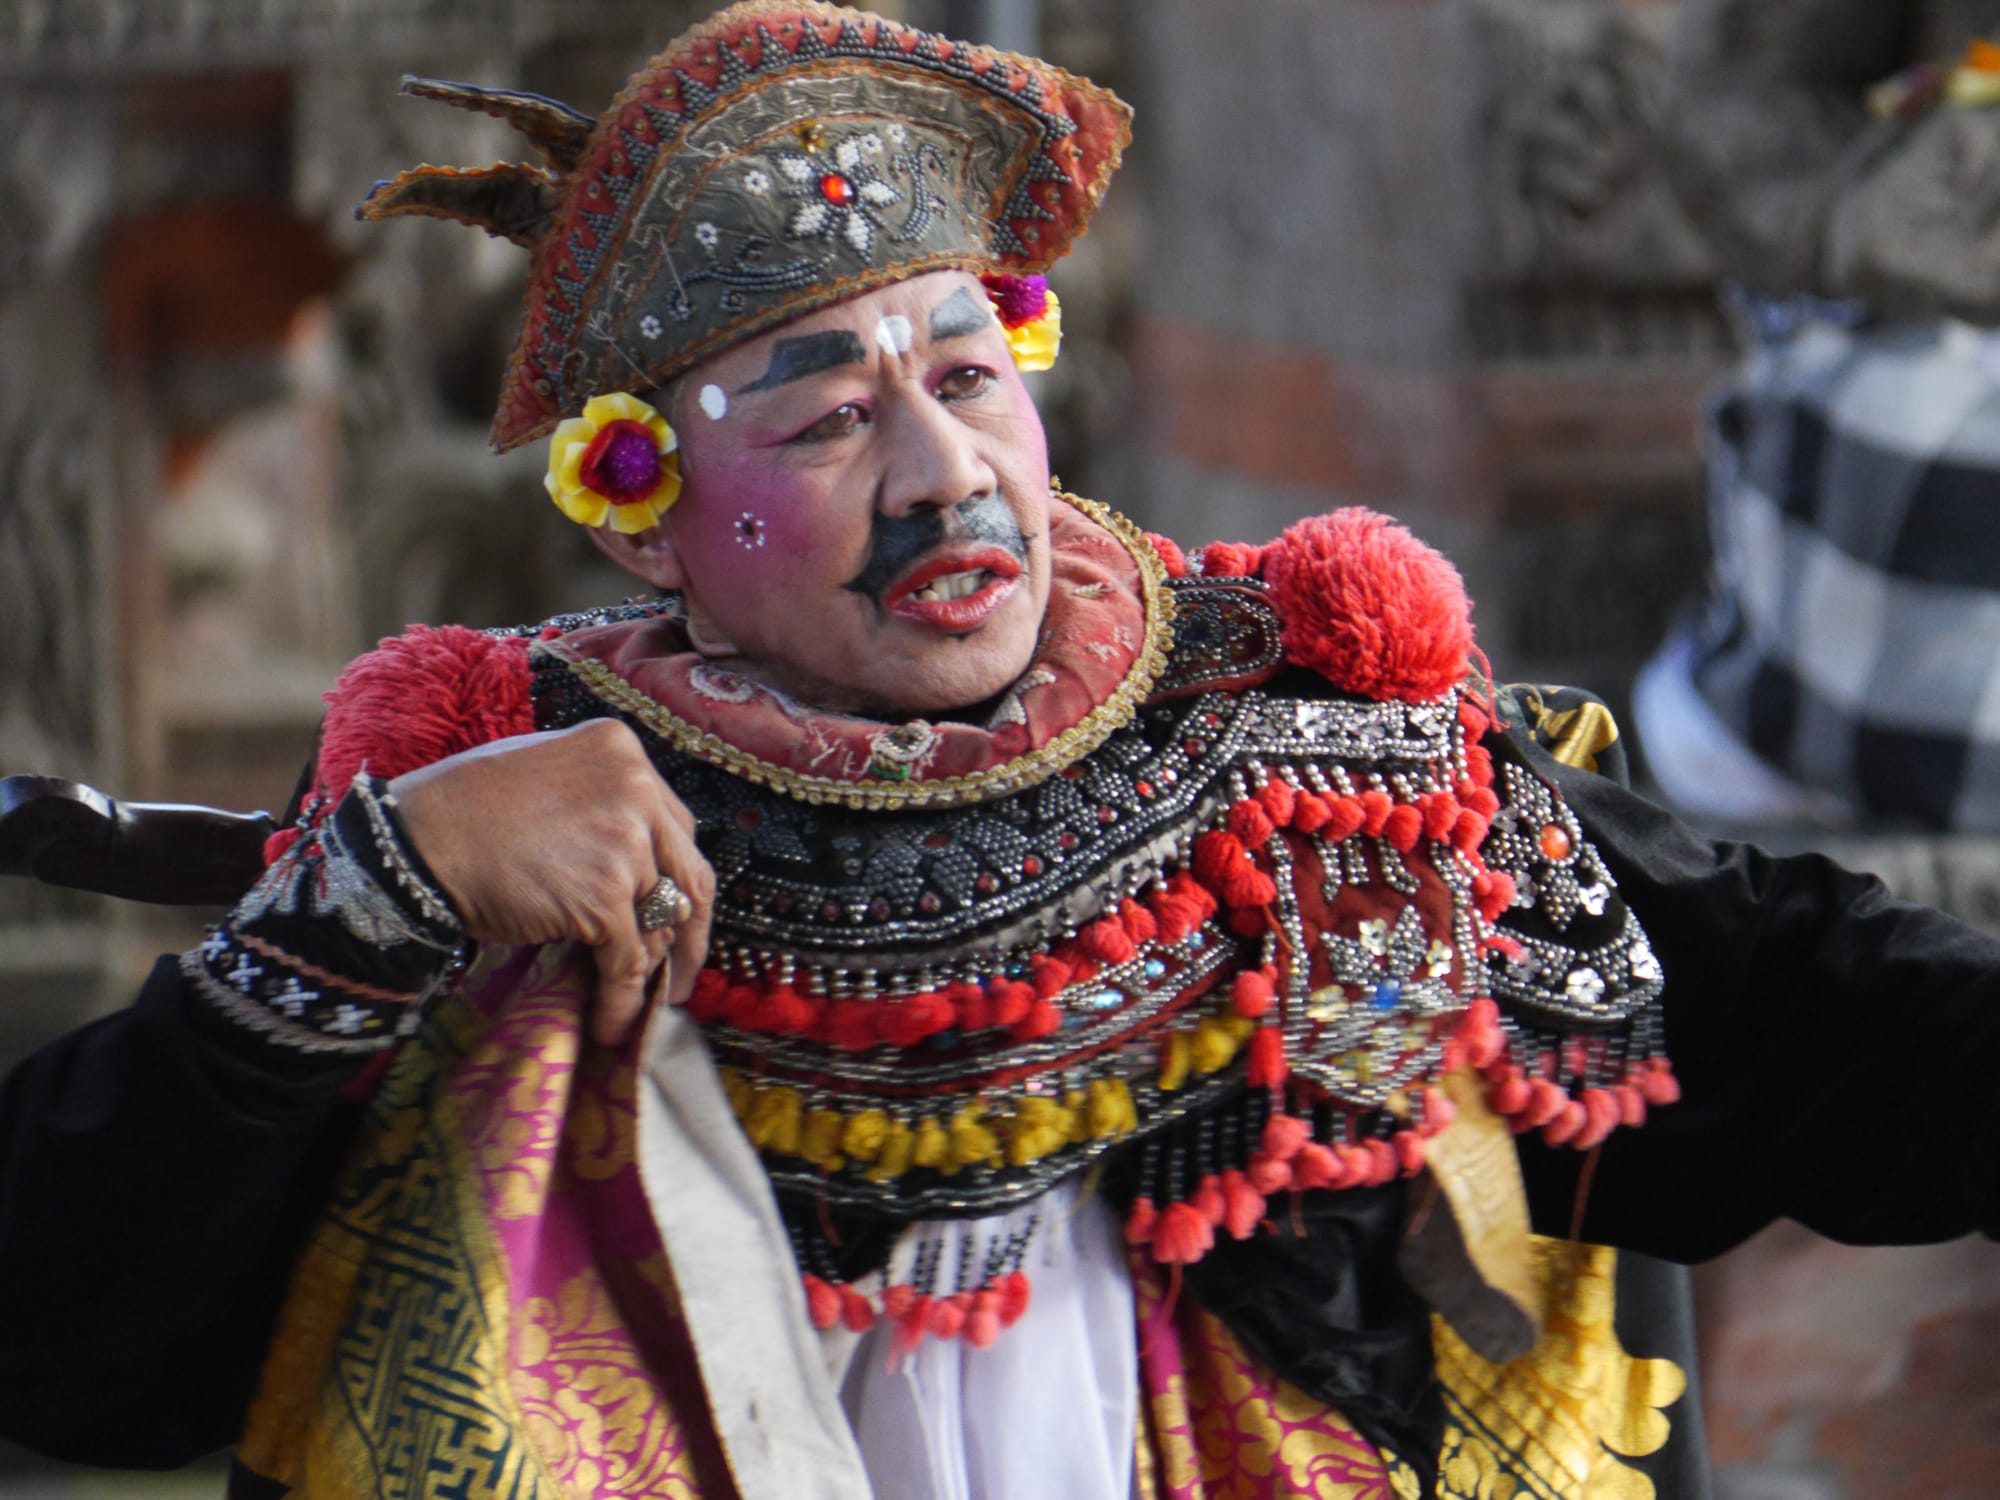 Photo by Author — a servant of Dewi Kunt — Sahadewa Barong and Kris Dance, Bali, Indonesia